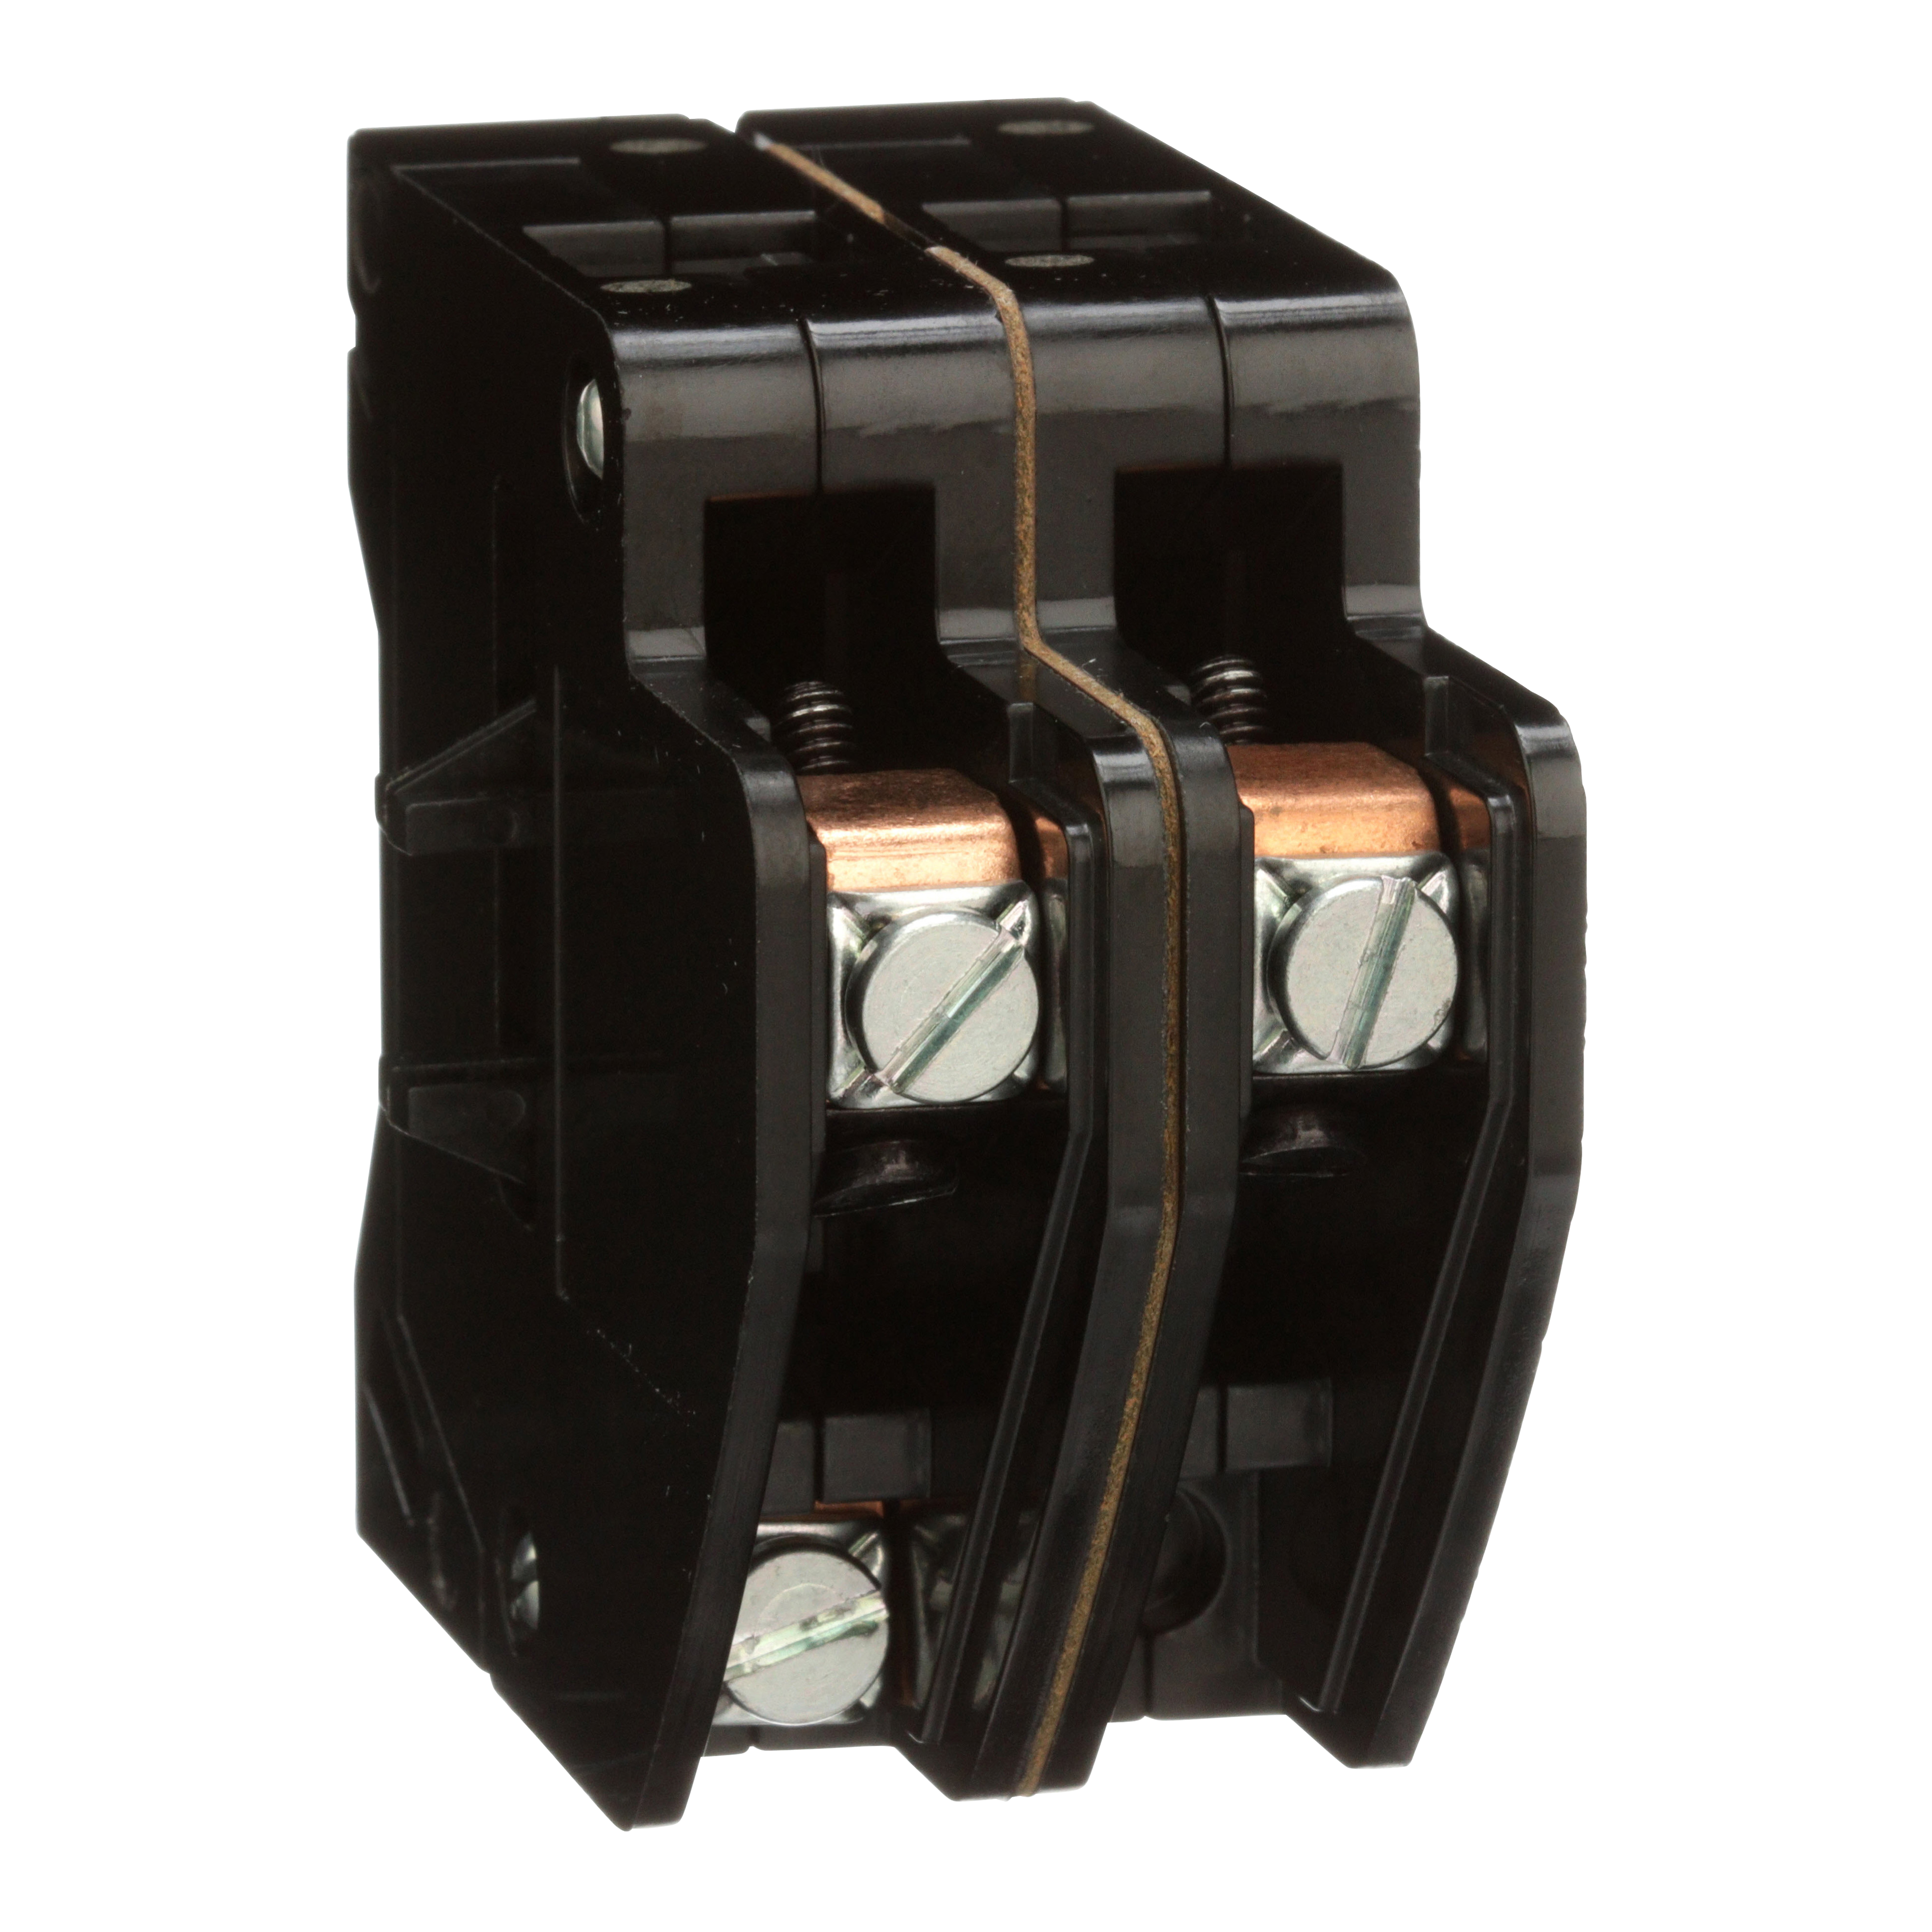 Contactor, Type L, multipole lighting, power pole, 30A, 2 pole, 2 normally open contacts, 600V, right side mount